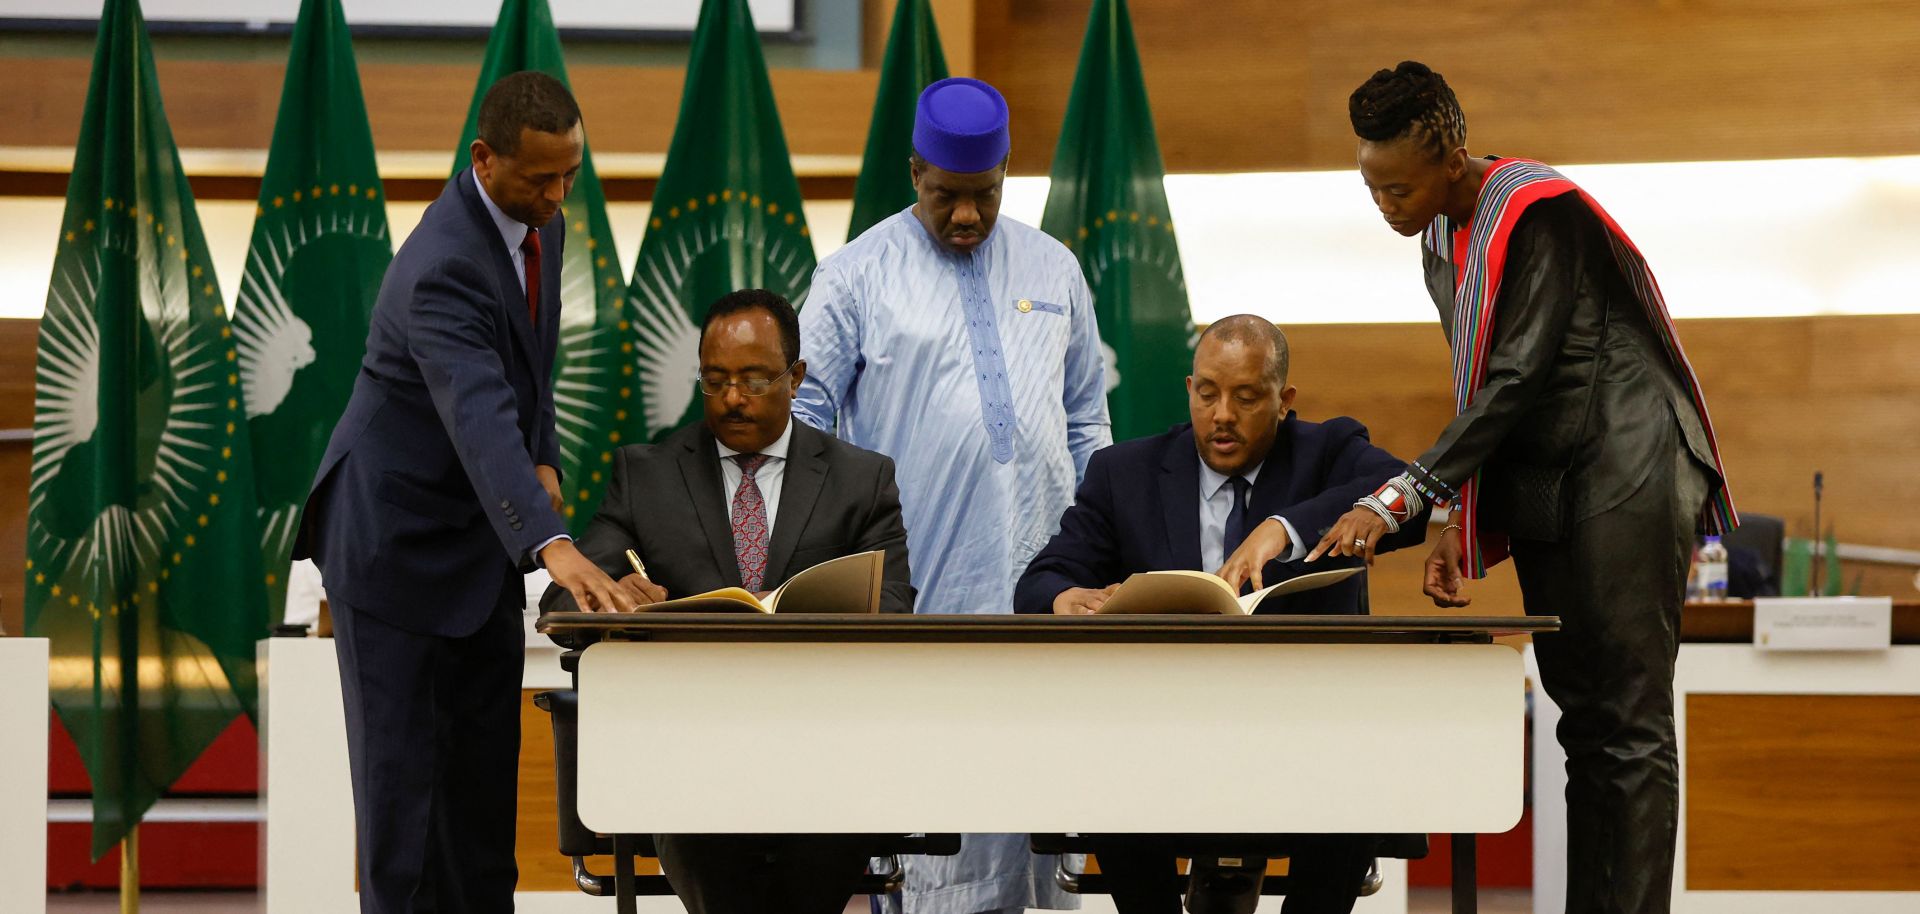 Redwan Hussein (second from the left), a representative of the Ethiopian government, and Getachew Reda (second from the right), a representative of the Tigray People's Liberation Front (TPLF), sign a peace agreement in Pretoria, South Africa, on Nov. 2, 2022.